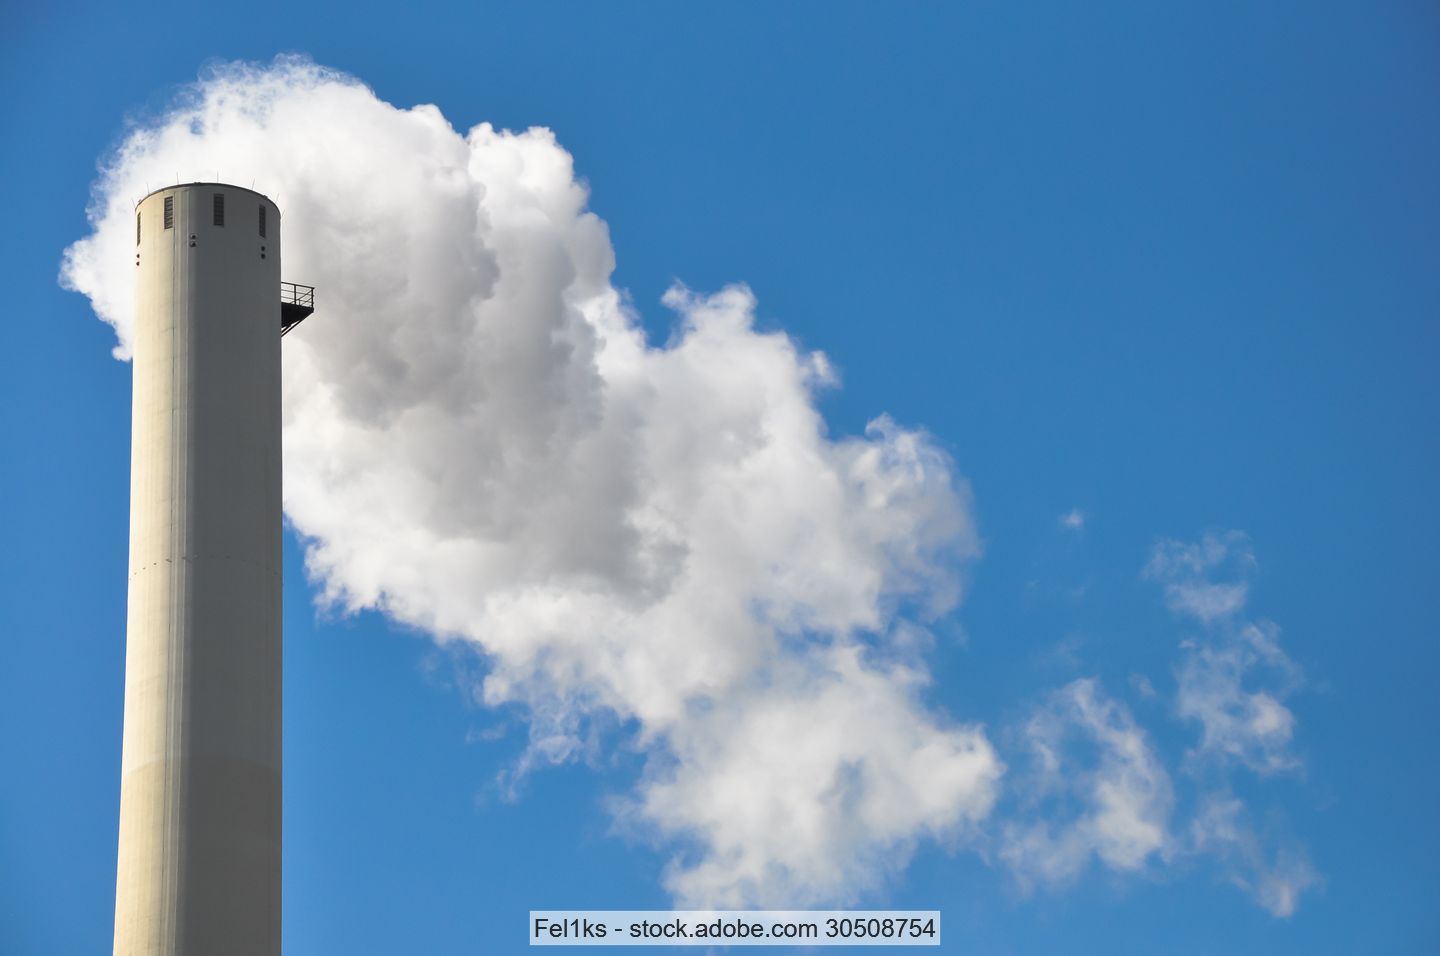 Stock photo of a power plant's stack with a plume rising from it.